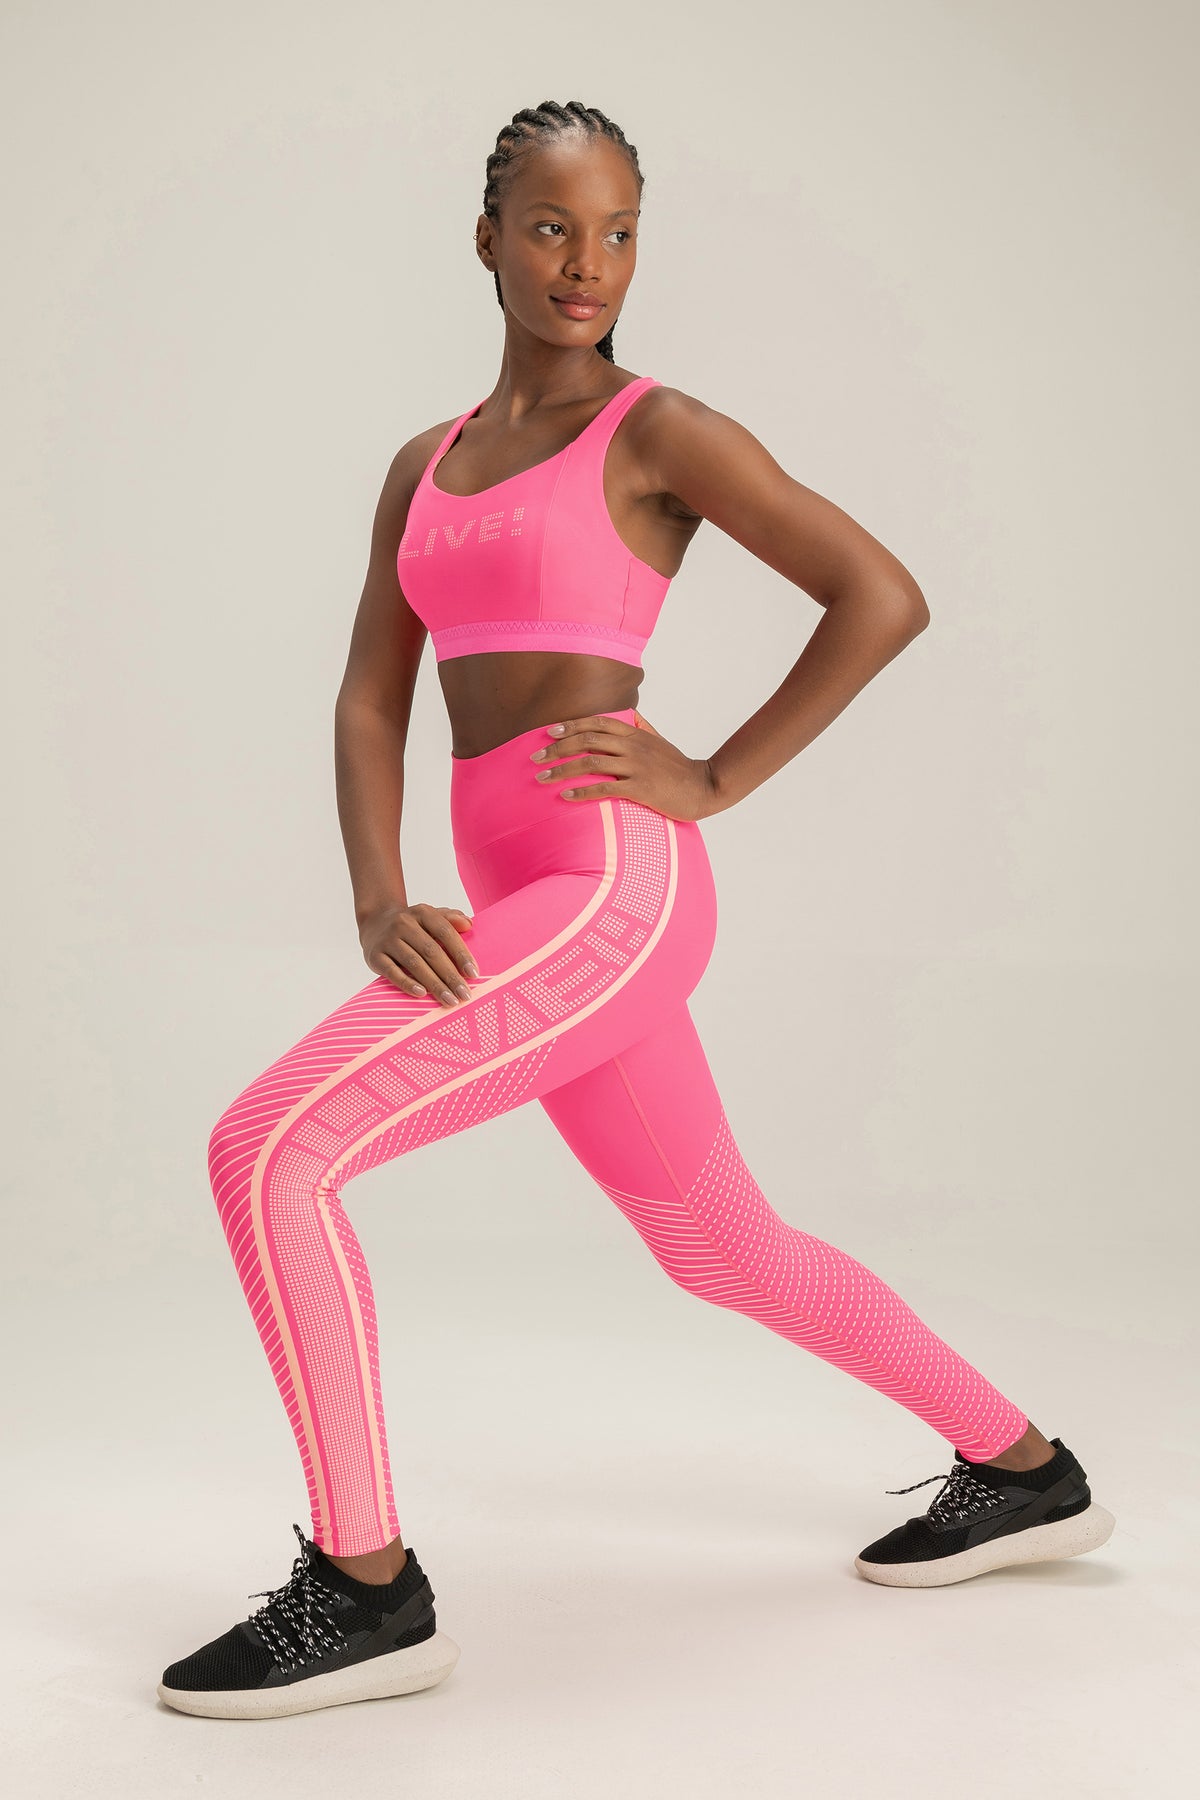 Shop Volleyball Leggings For Women with great discounts and prices